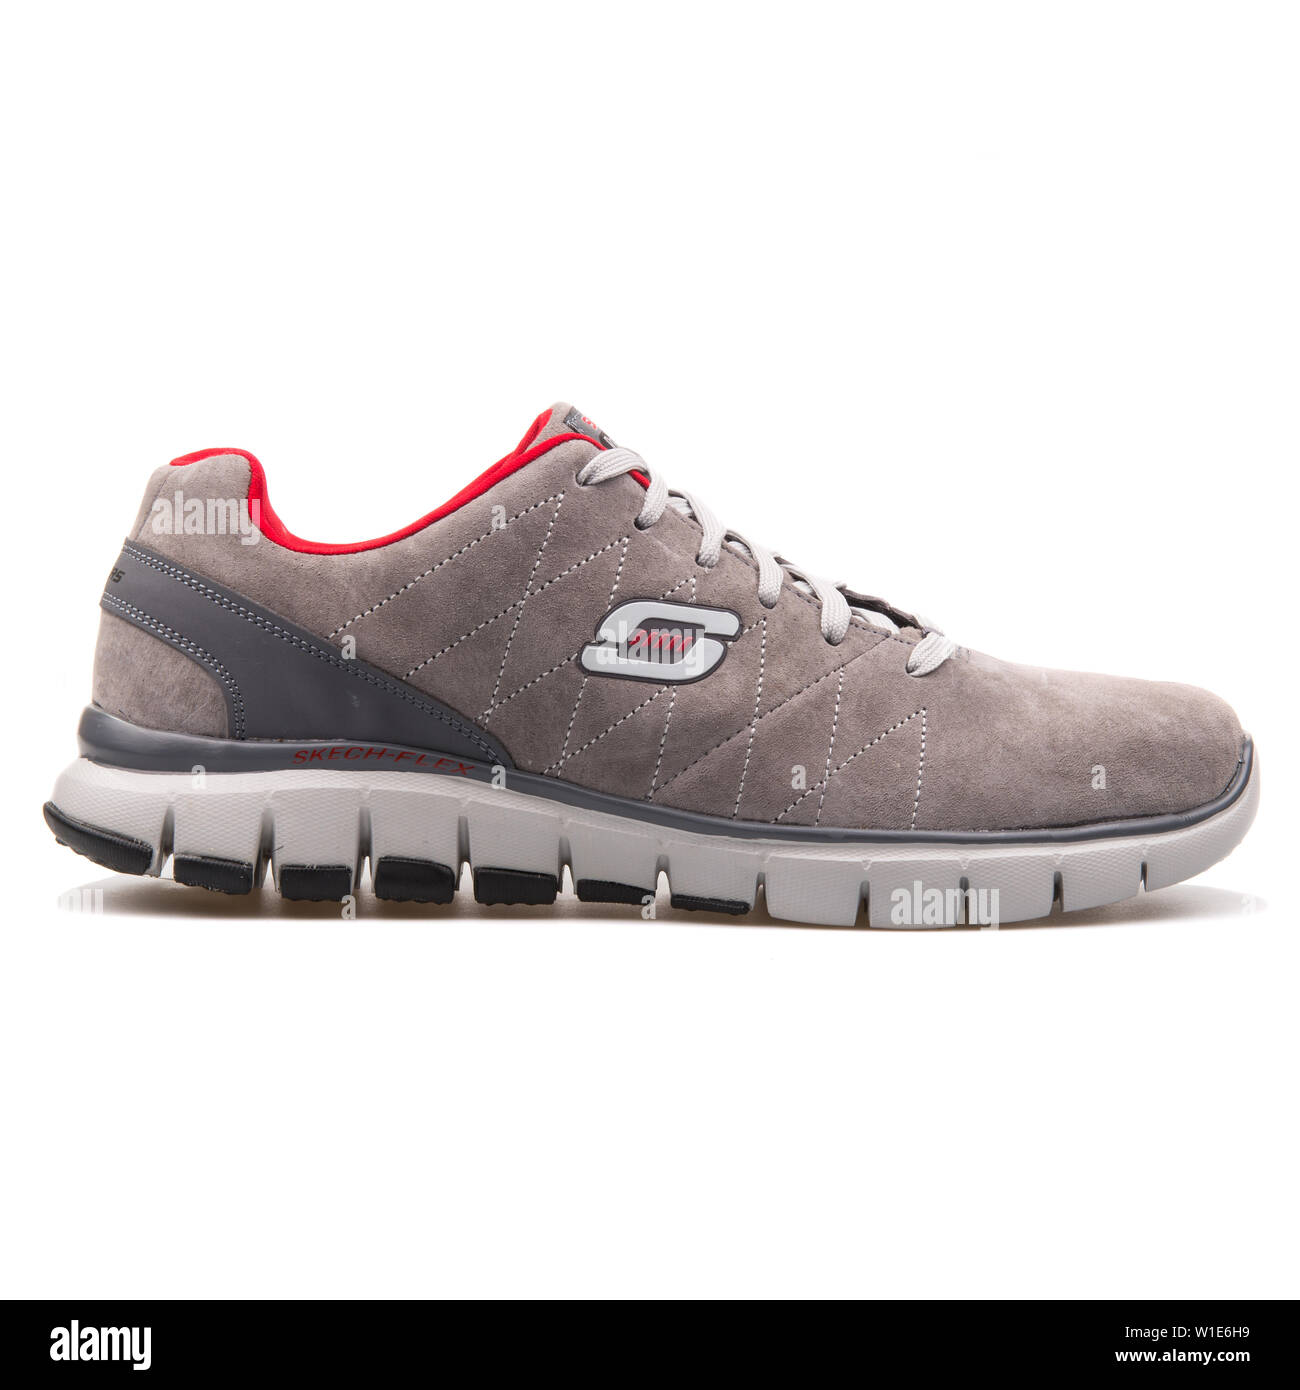 Agotamiento Decaer deslealtad zapatillas skechers 2017 Cheaper Than Retail Price> Buy Clothing,  Accessories and lifestyle products for women & men -